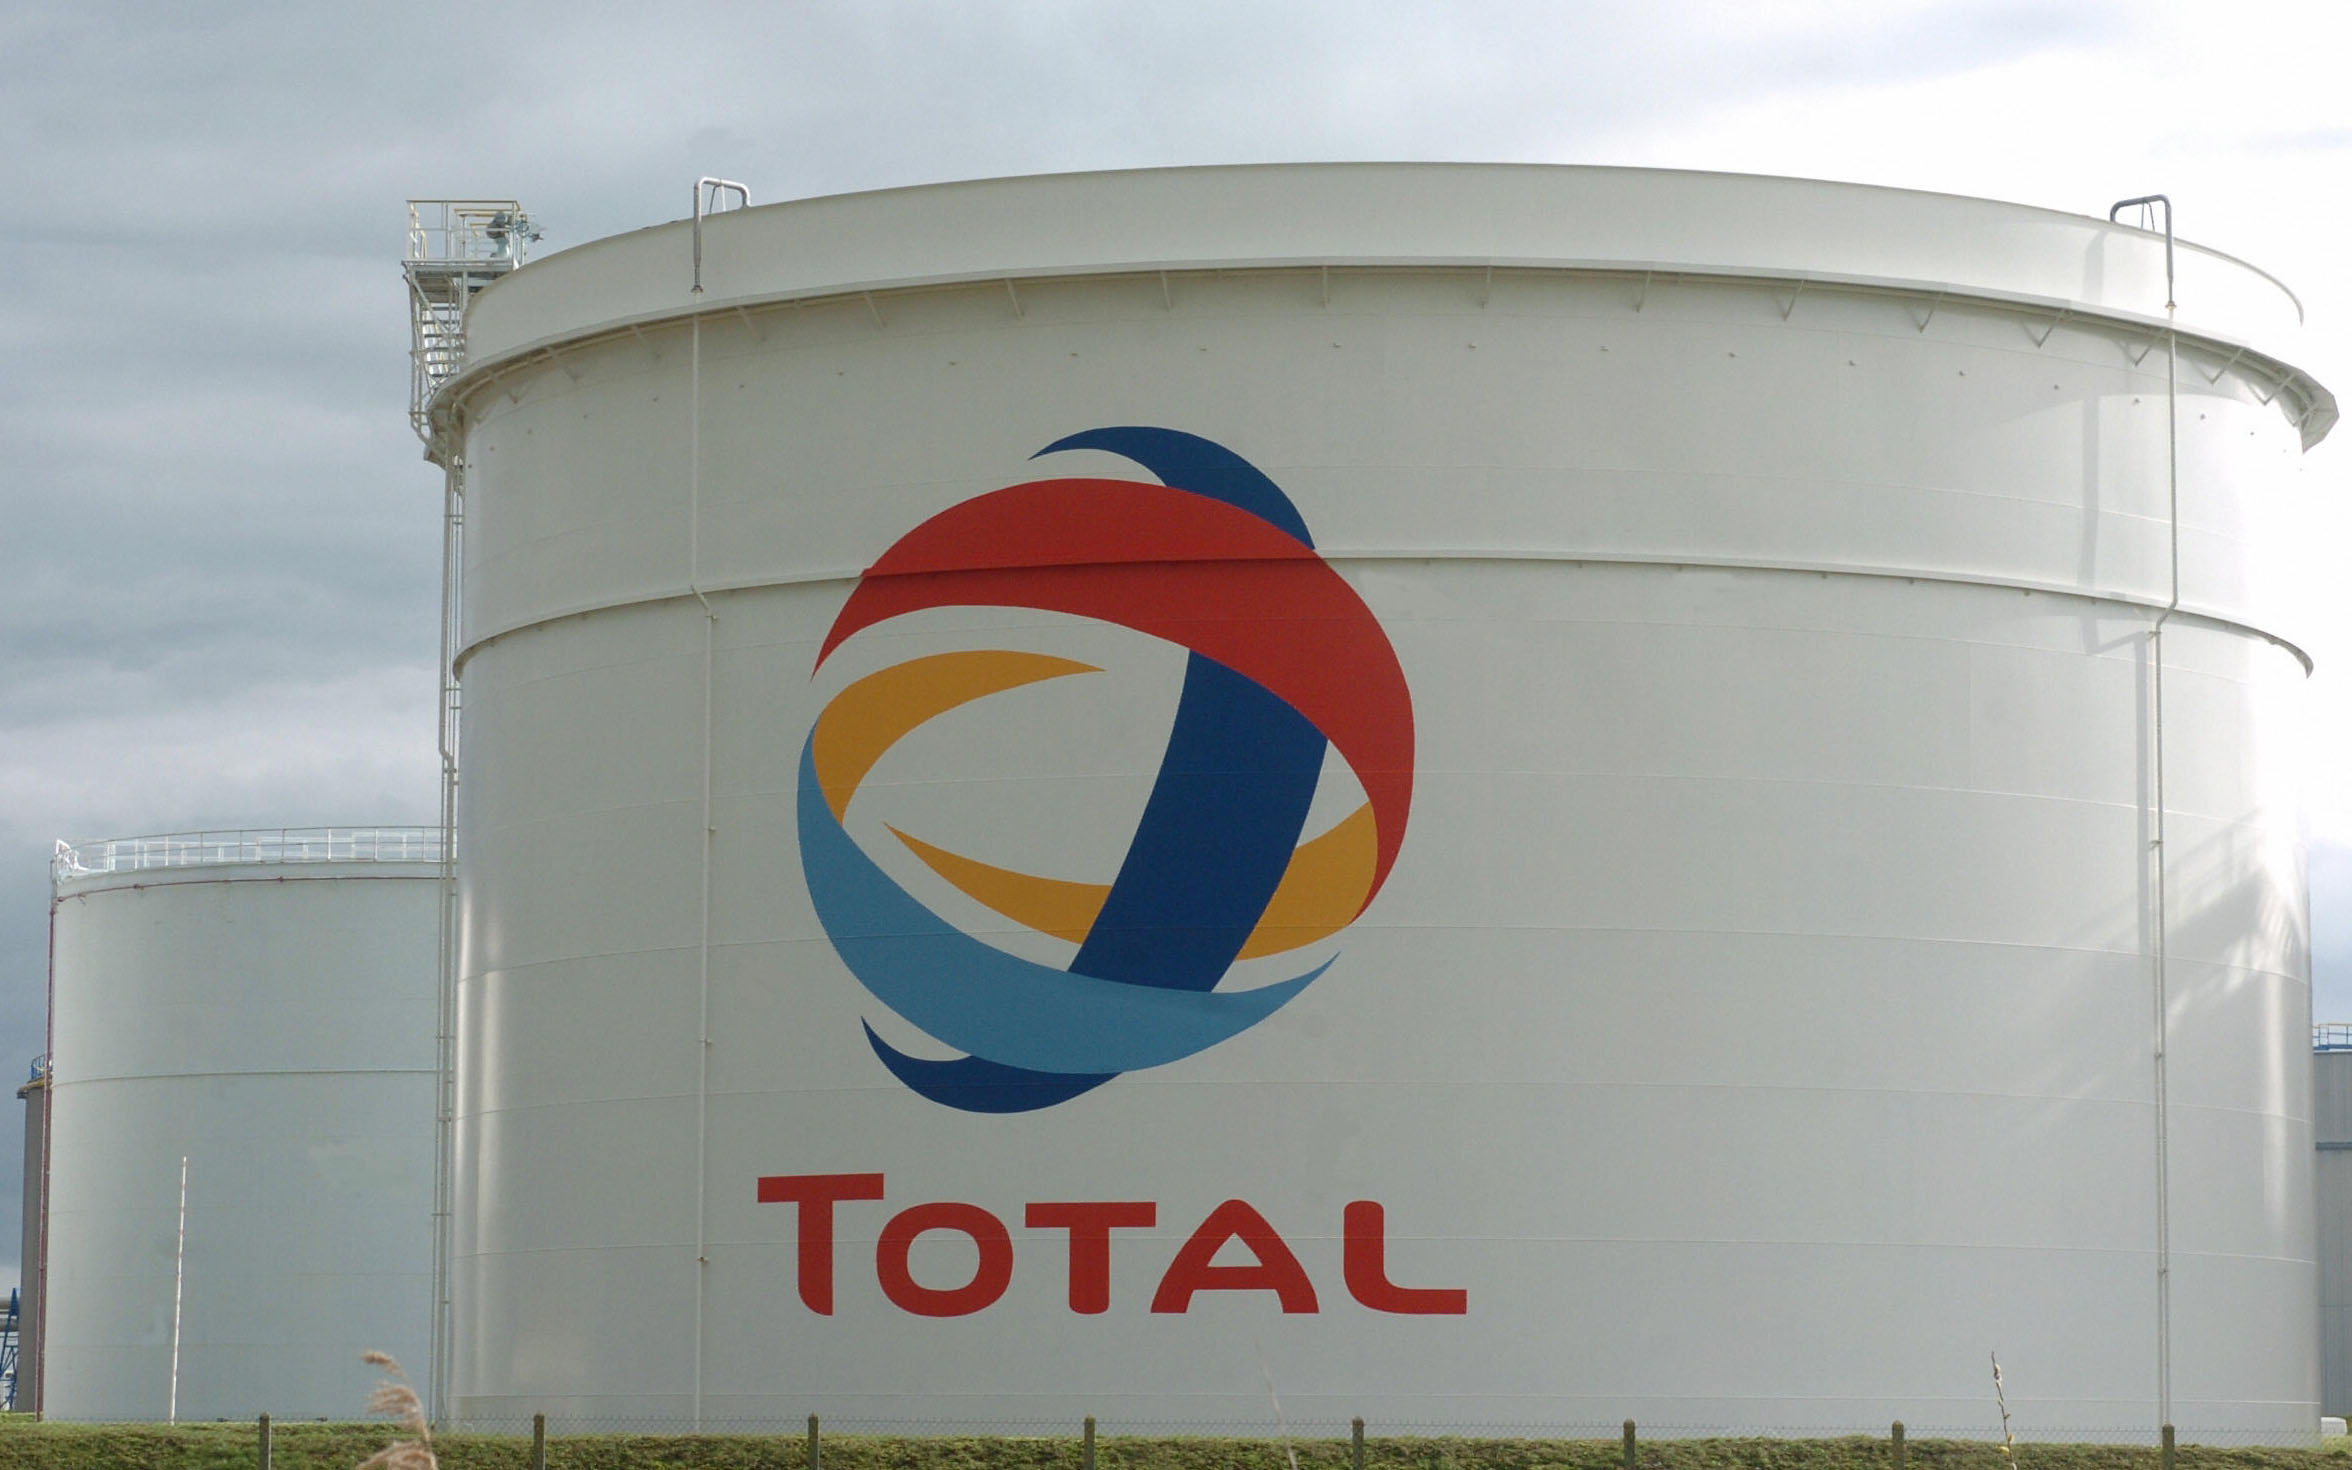 Tears As Total Oil Project Hurts Tens Of Thousands In Rural Uganda